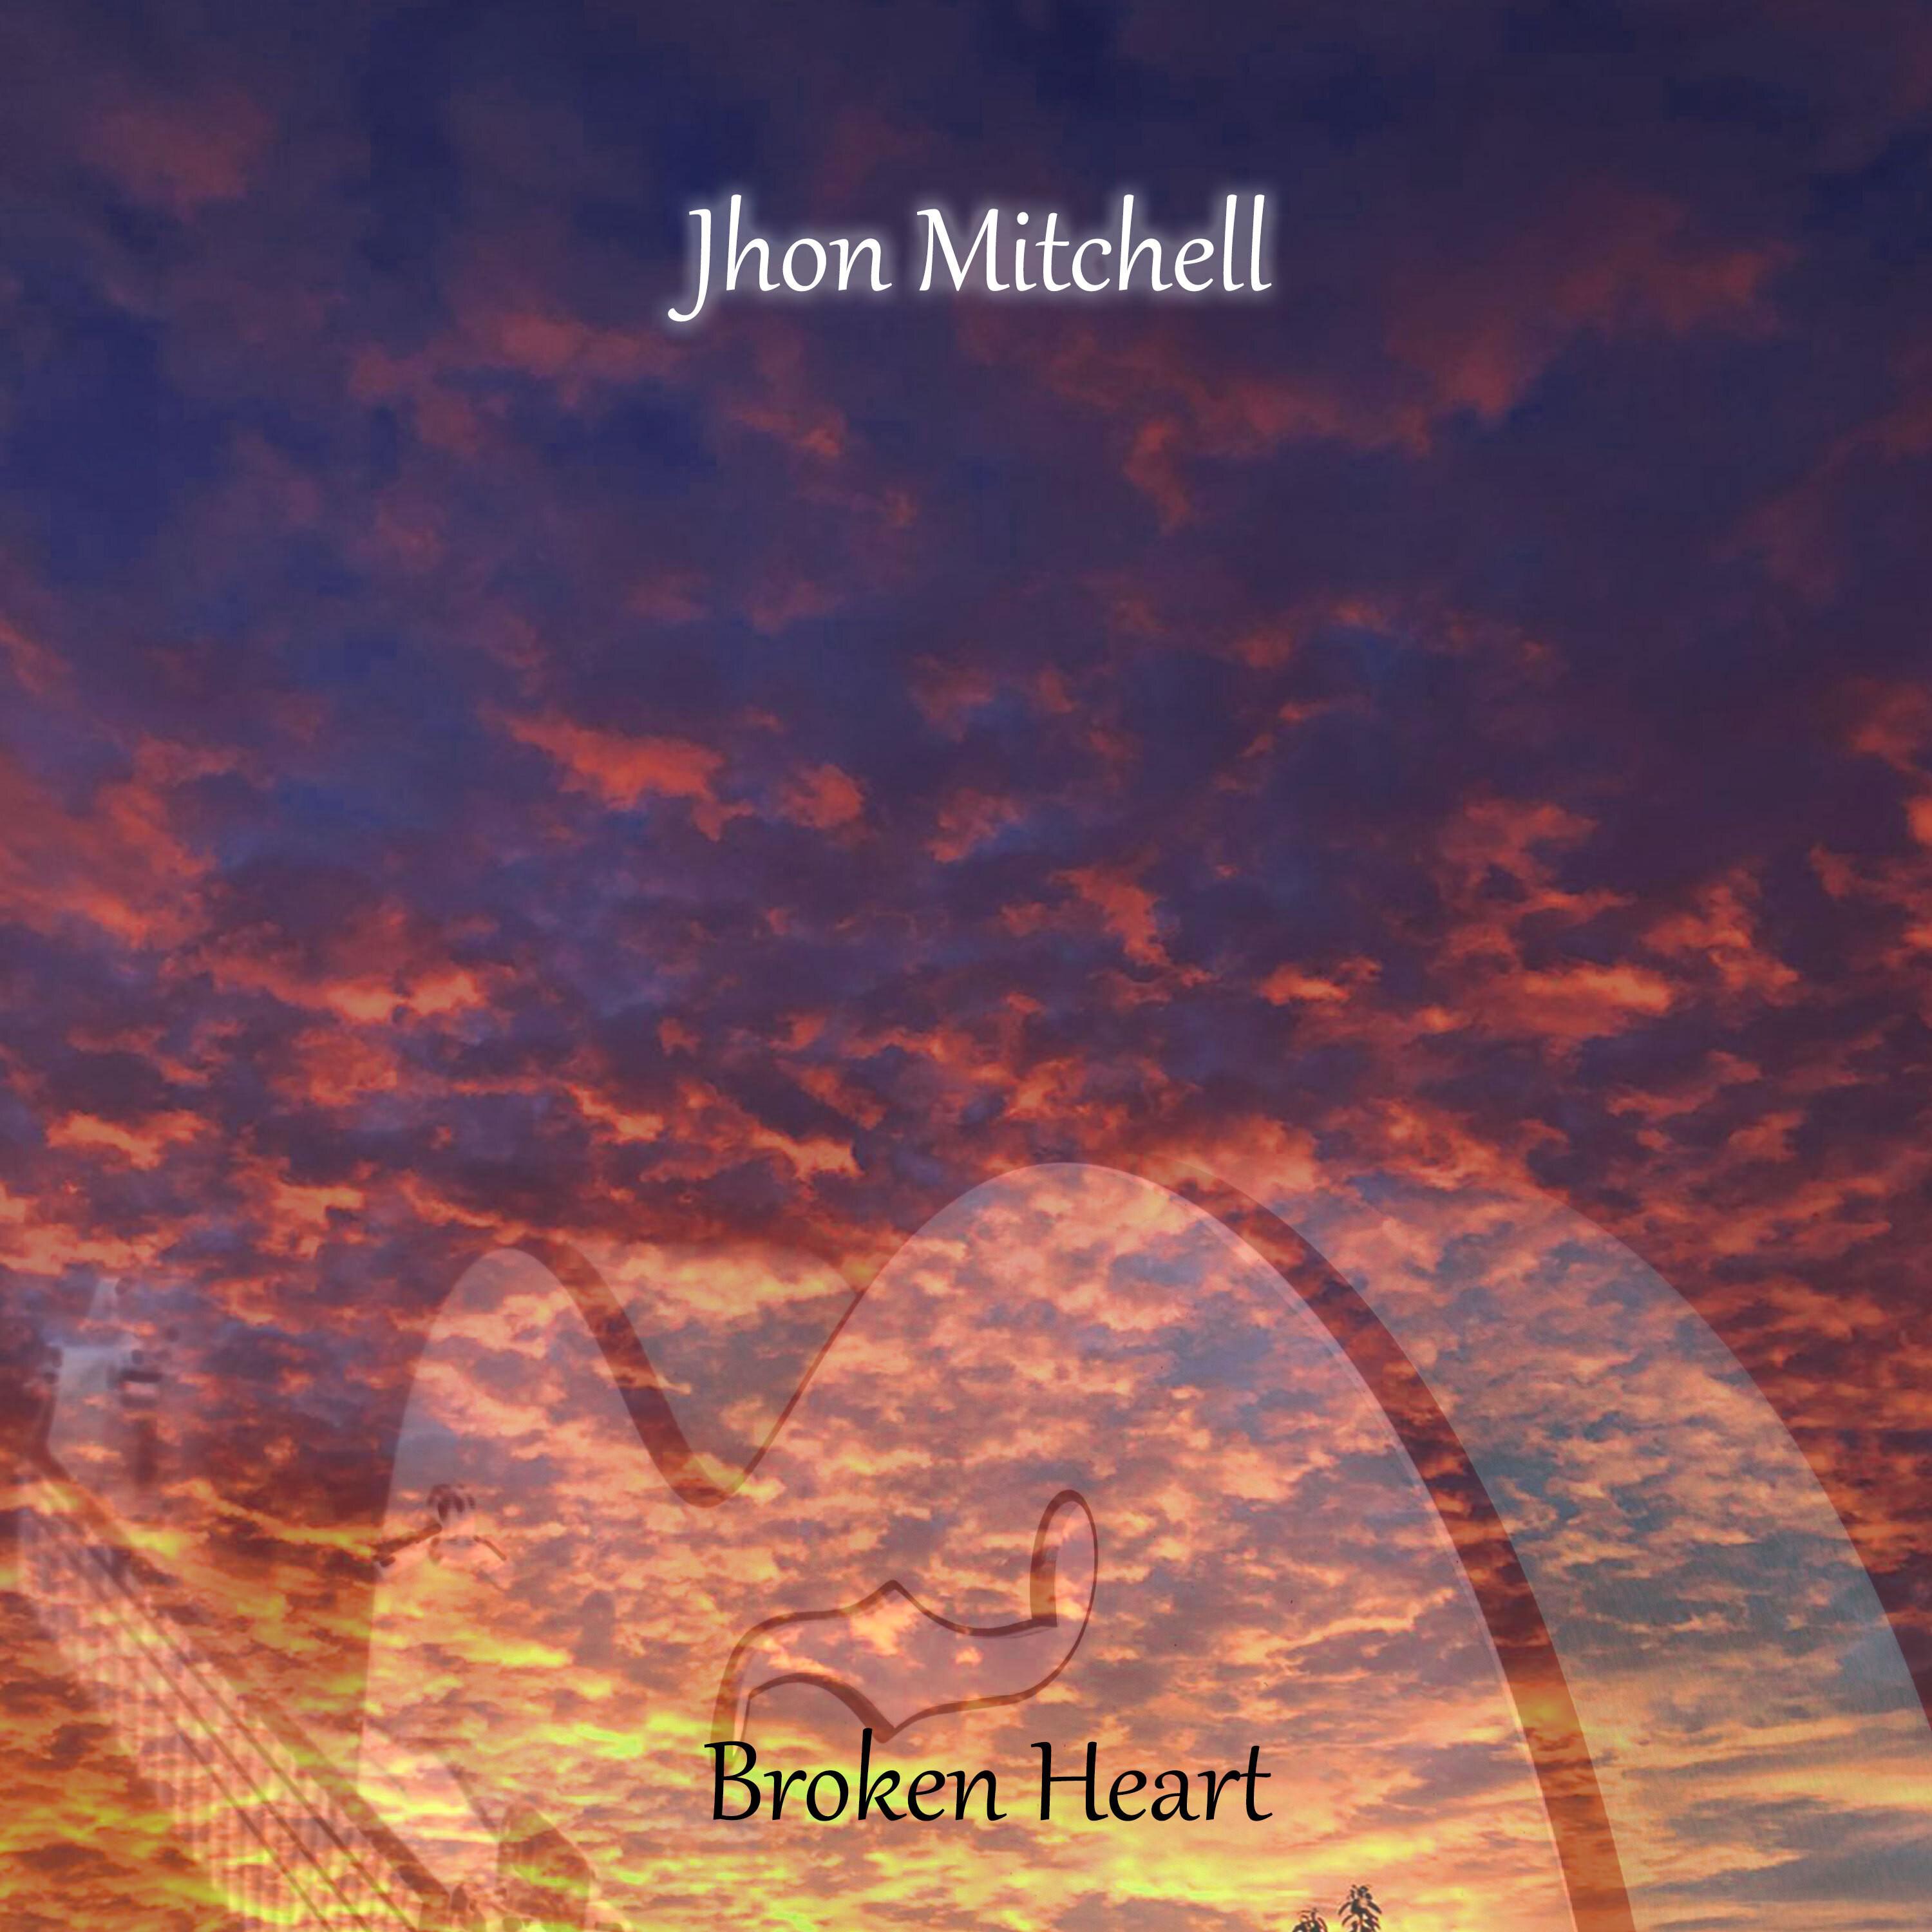 Jhon Mitchell - Flow Away Like Sand in My Hands